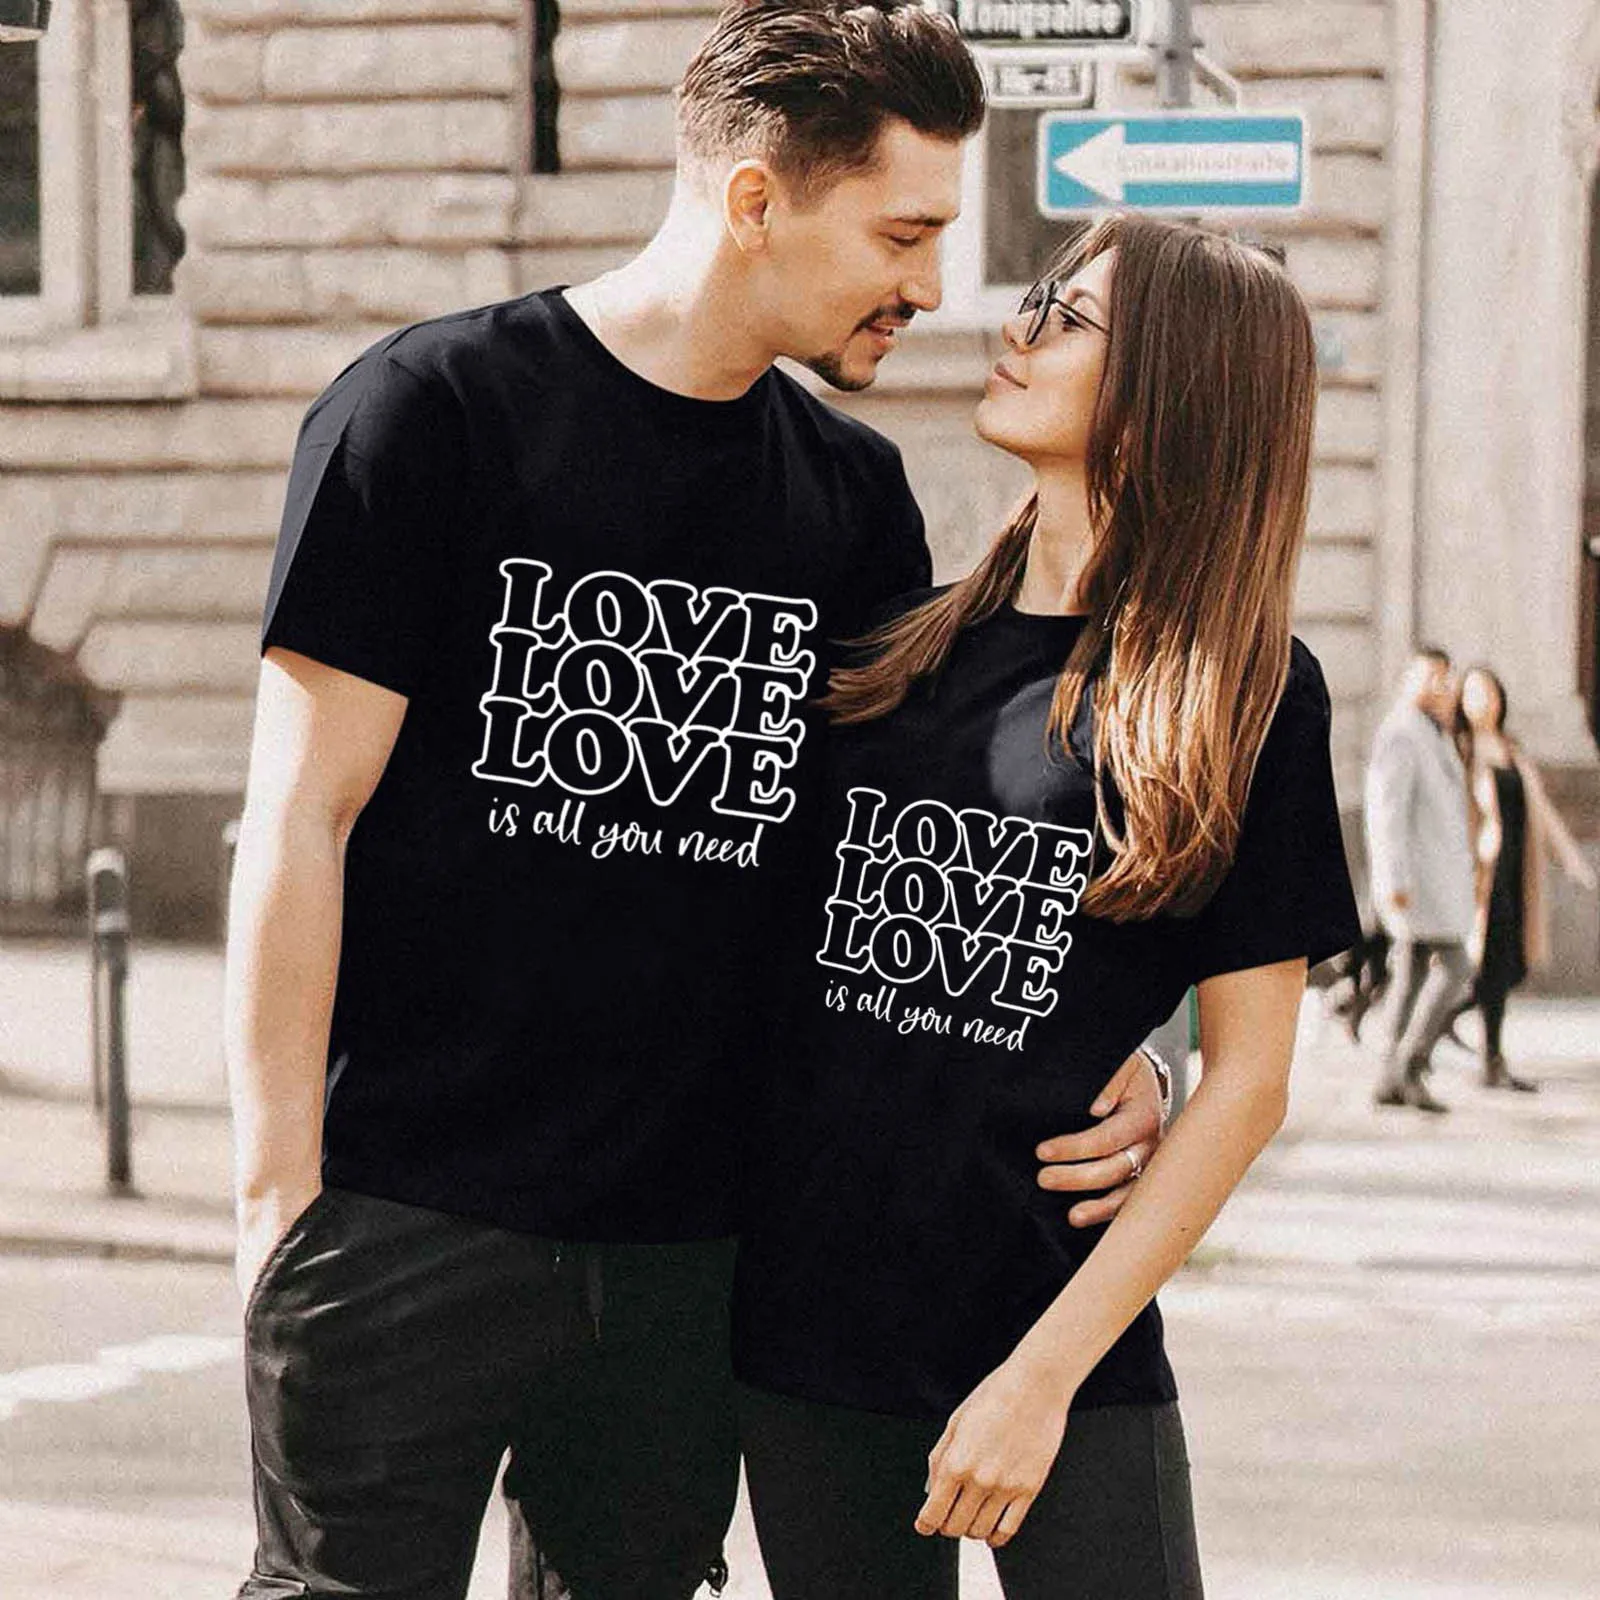 ESKNAS Men Pullover Love Letter Print Jumpers Couples Lovers Valentines Day T-Shirts Short Sleeve Sweatshirts 